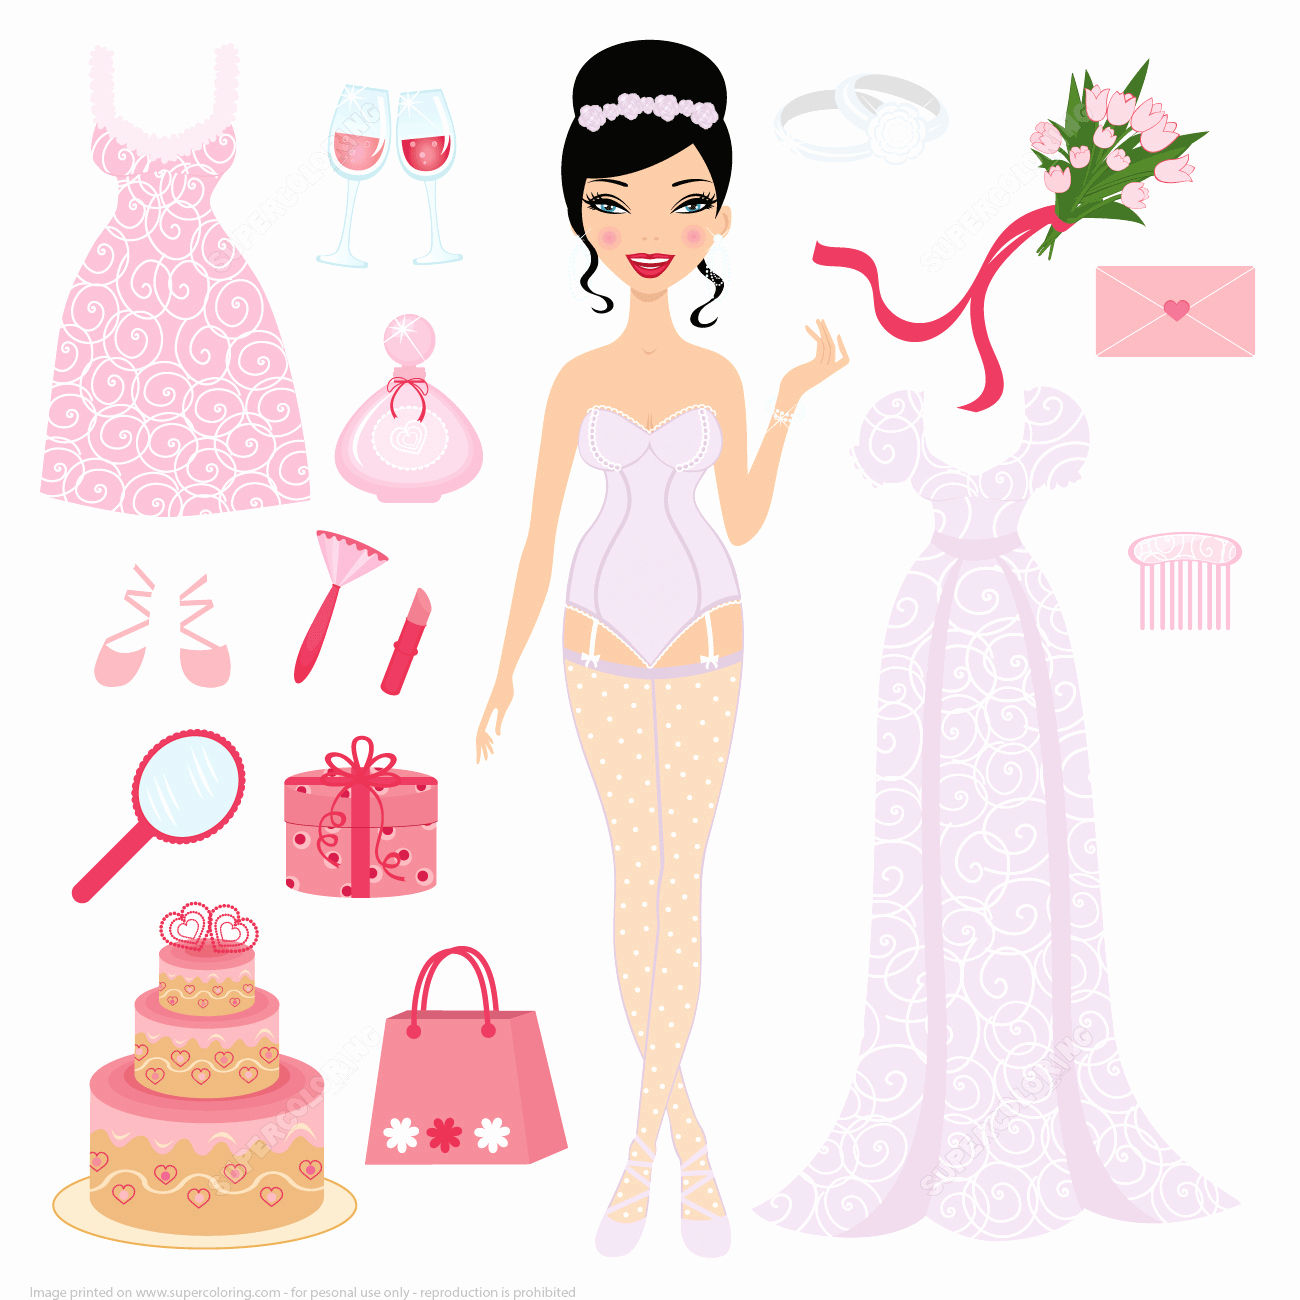 Paper Doll Clothing Template Unique Dress Up Bride Paper Doll for Wedding Ceremony